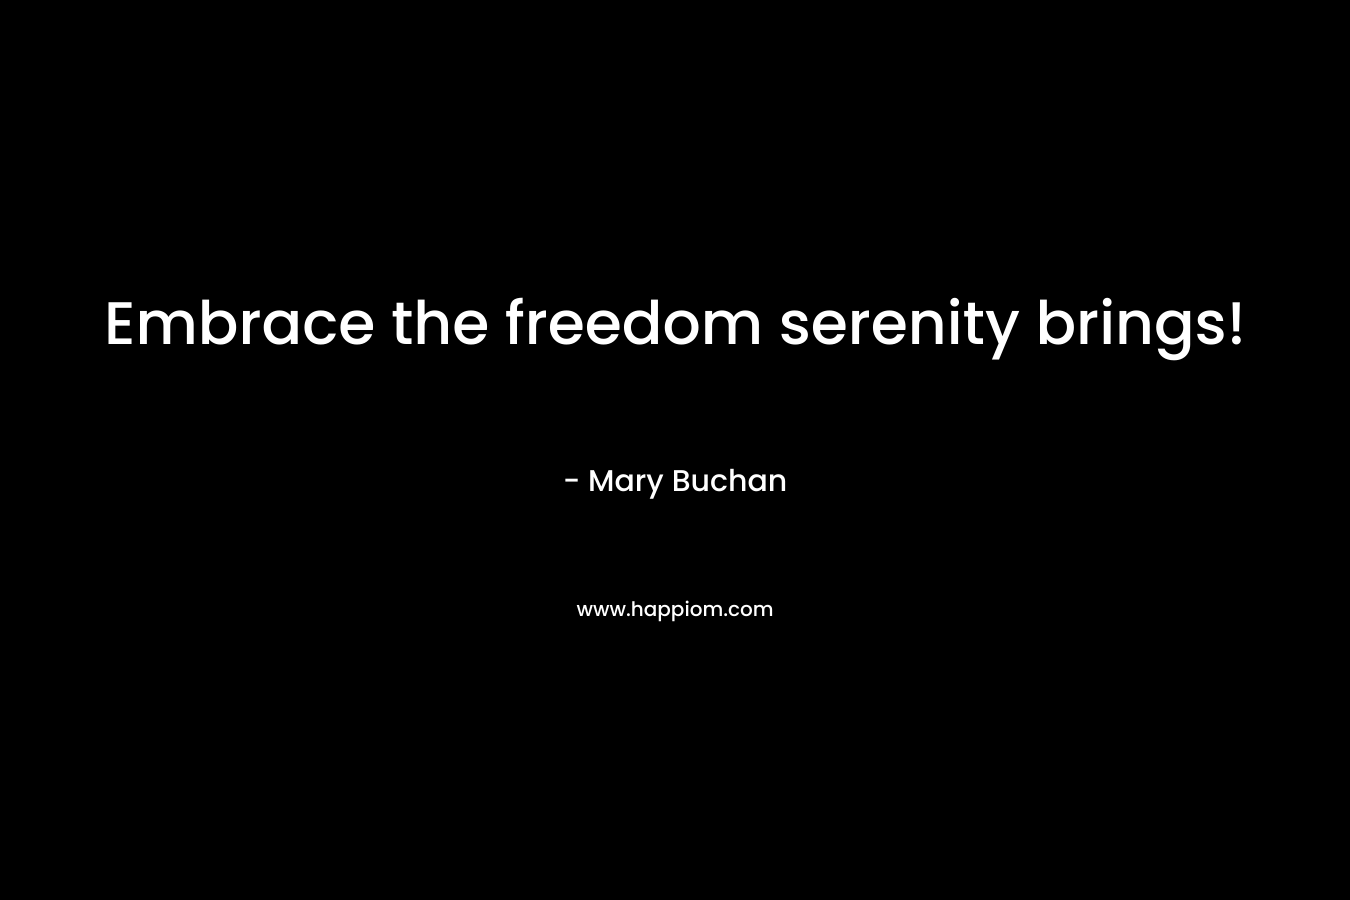 Embrace the freedom serenity brings! – Mary Buchan